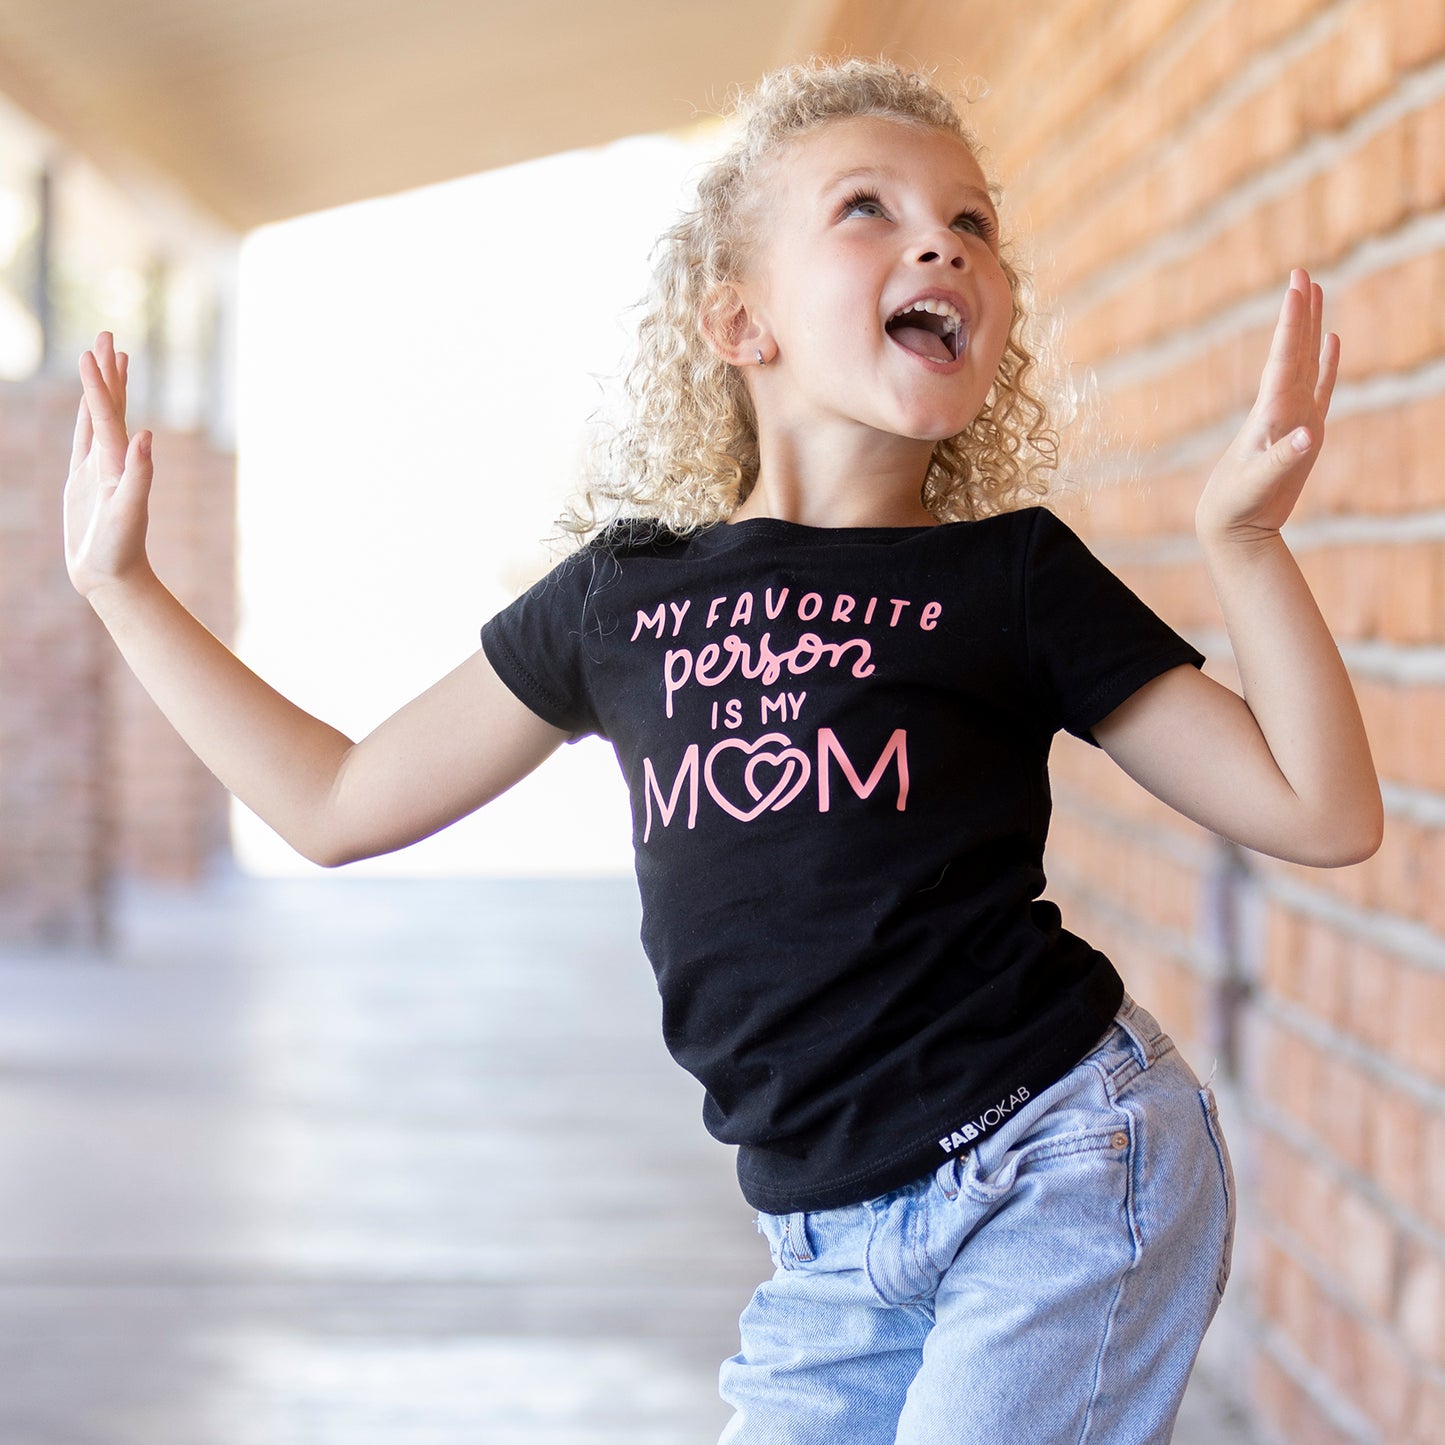 MY FAVORITE PERSON IS MY MOM (coral)  Kids, Girls, Boys Short Sleeve T-shirt FABVOKAB